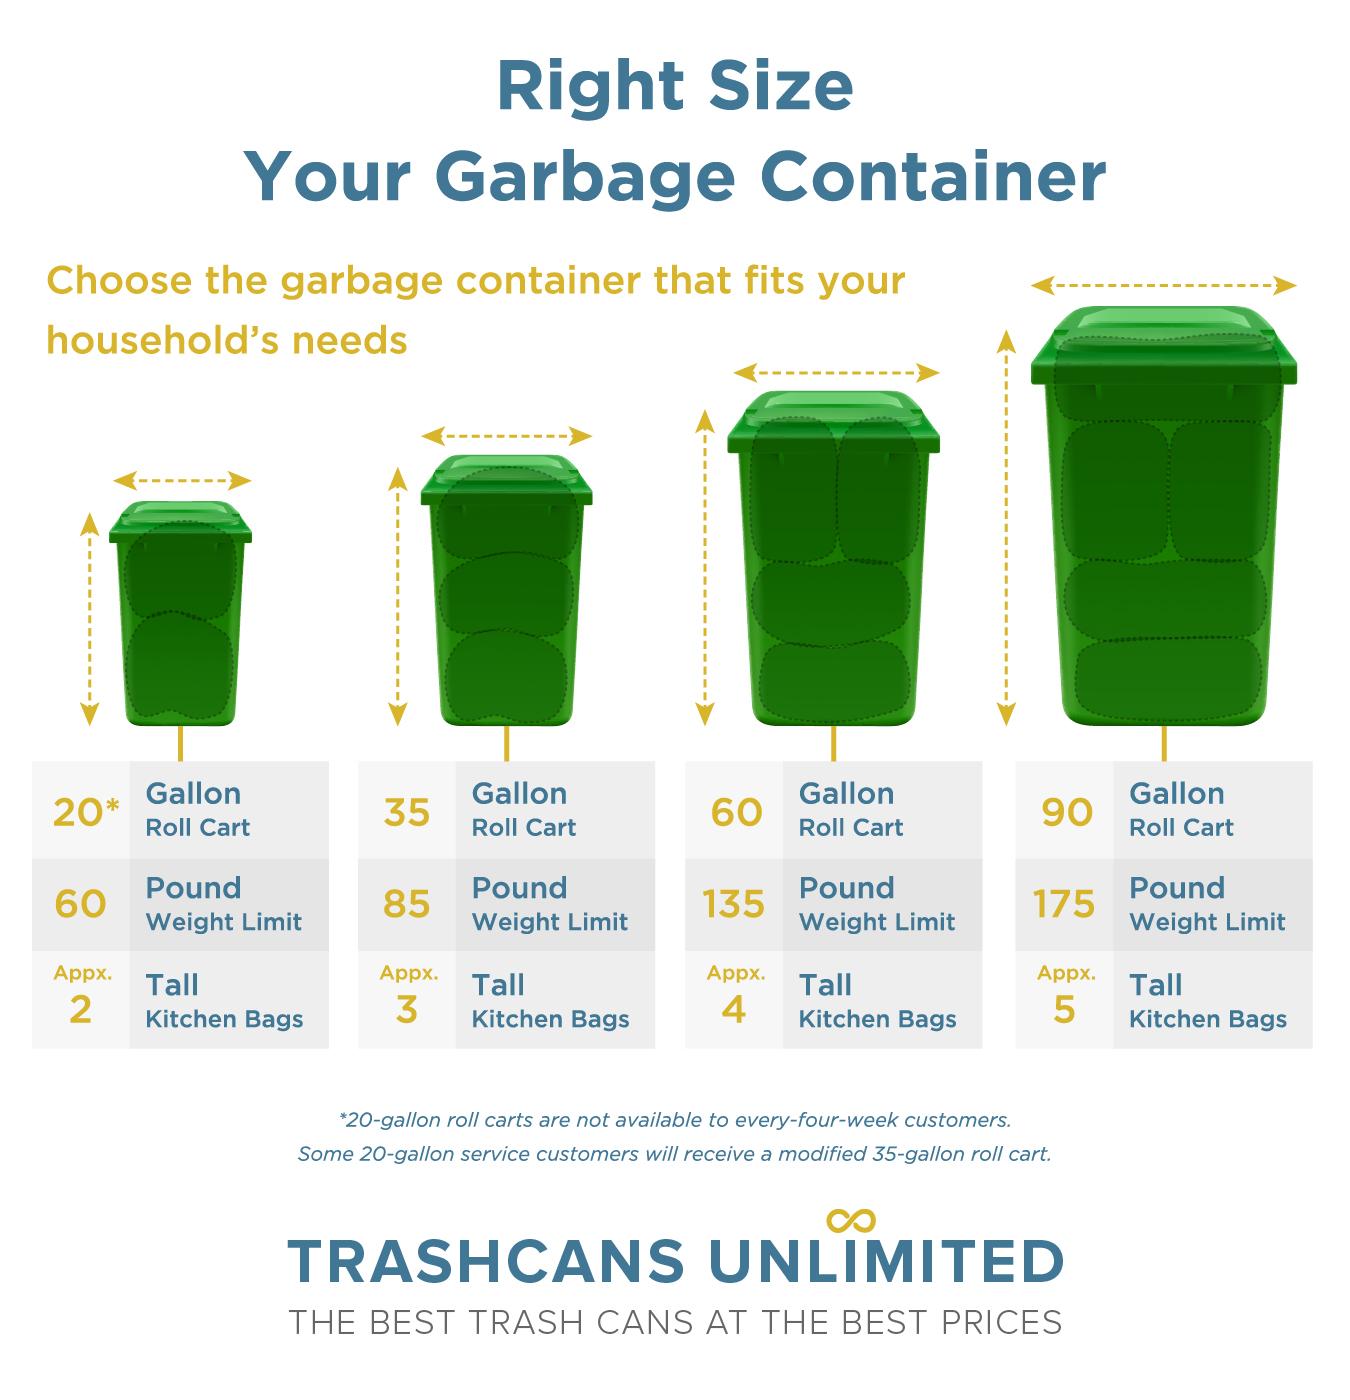 How Do I Find the Right Outdoor Garbage Can? - Trash Cans Unlimited ...